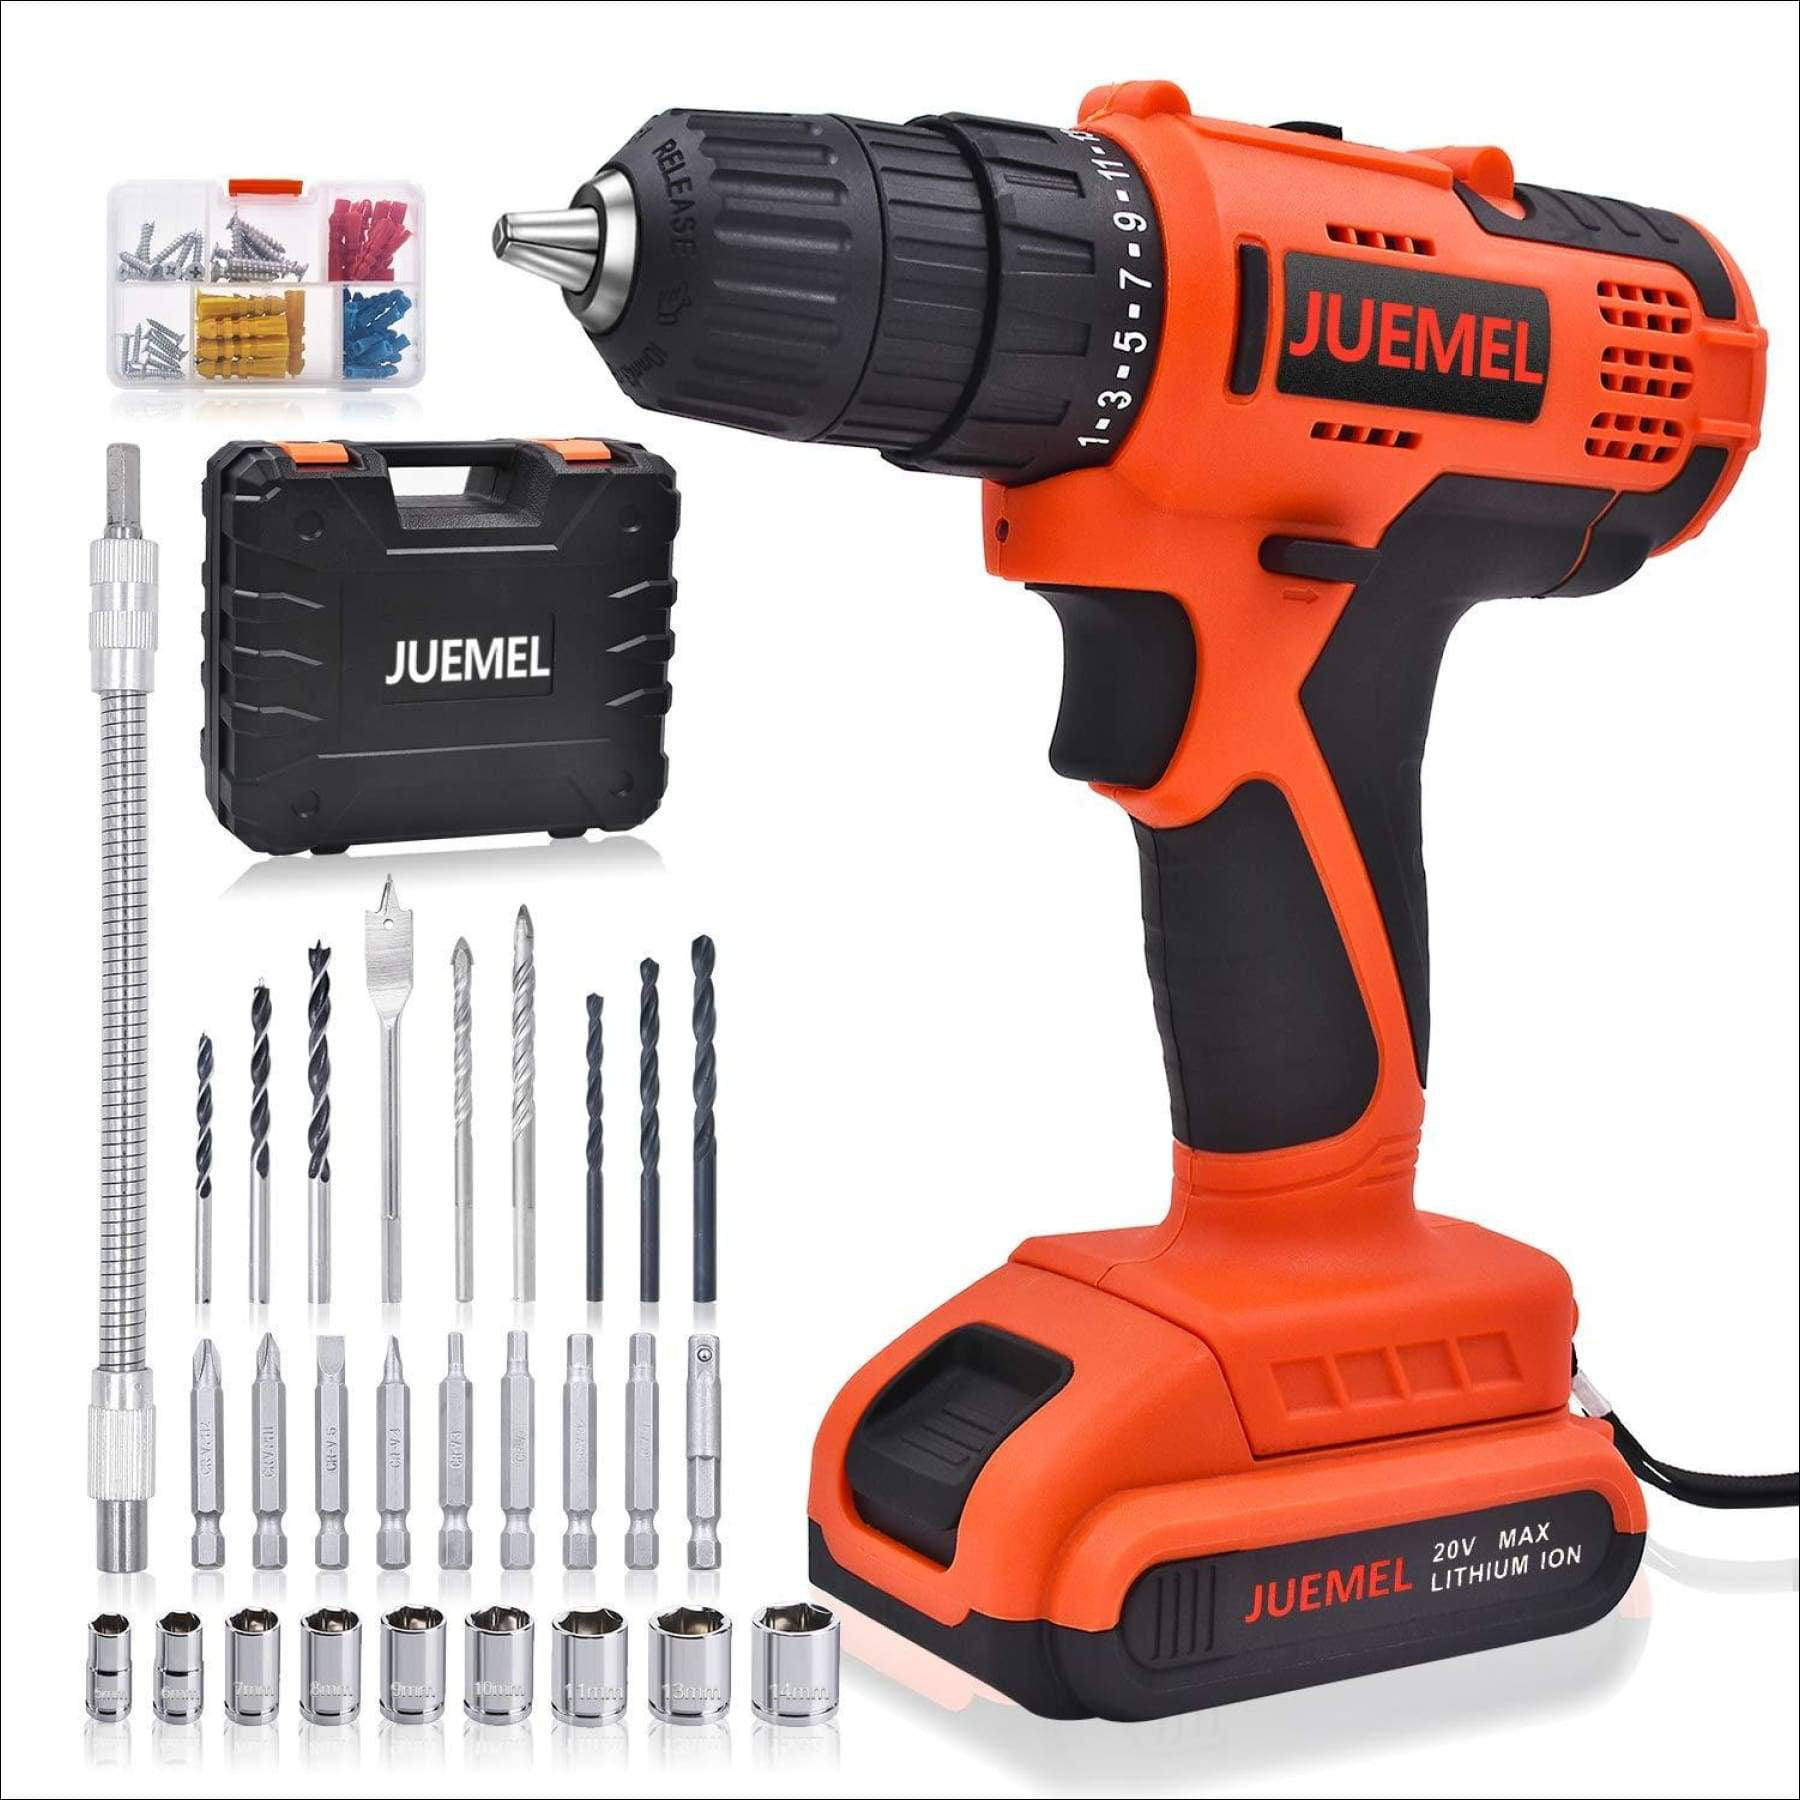 Electric Screwdriver Drill Set 2 Battery 1500mAh / Charger / 18+1 Clutch / 2 Variable Speed / 3/8inch Chuck Cordless Drill with 2 Batteries for DIY Project JUEMEL 20V Power Drill